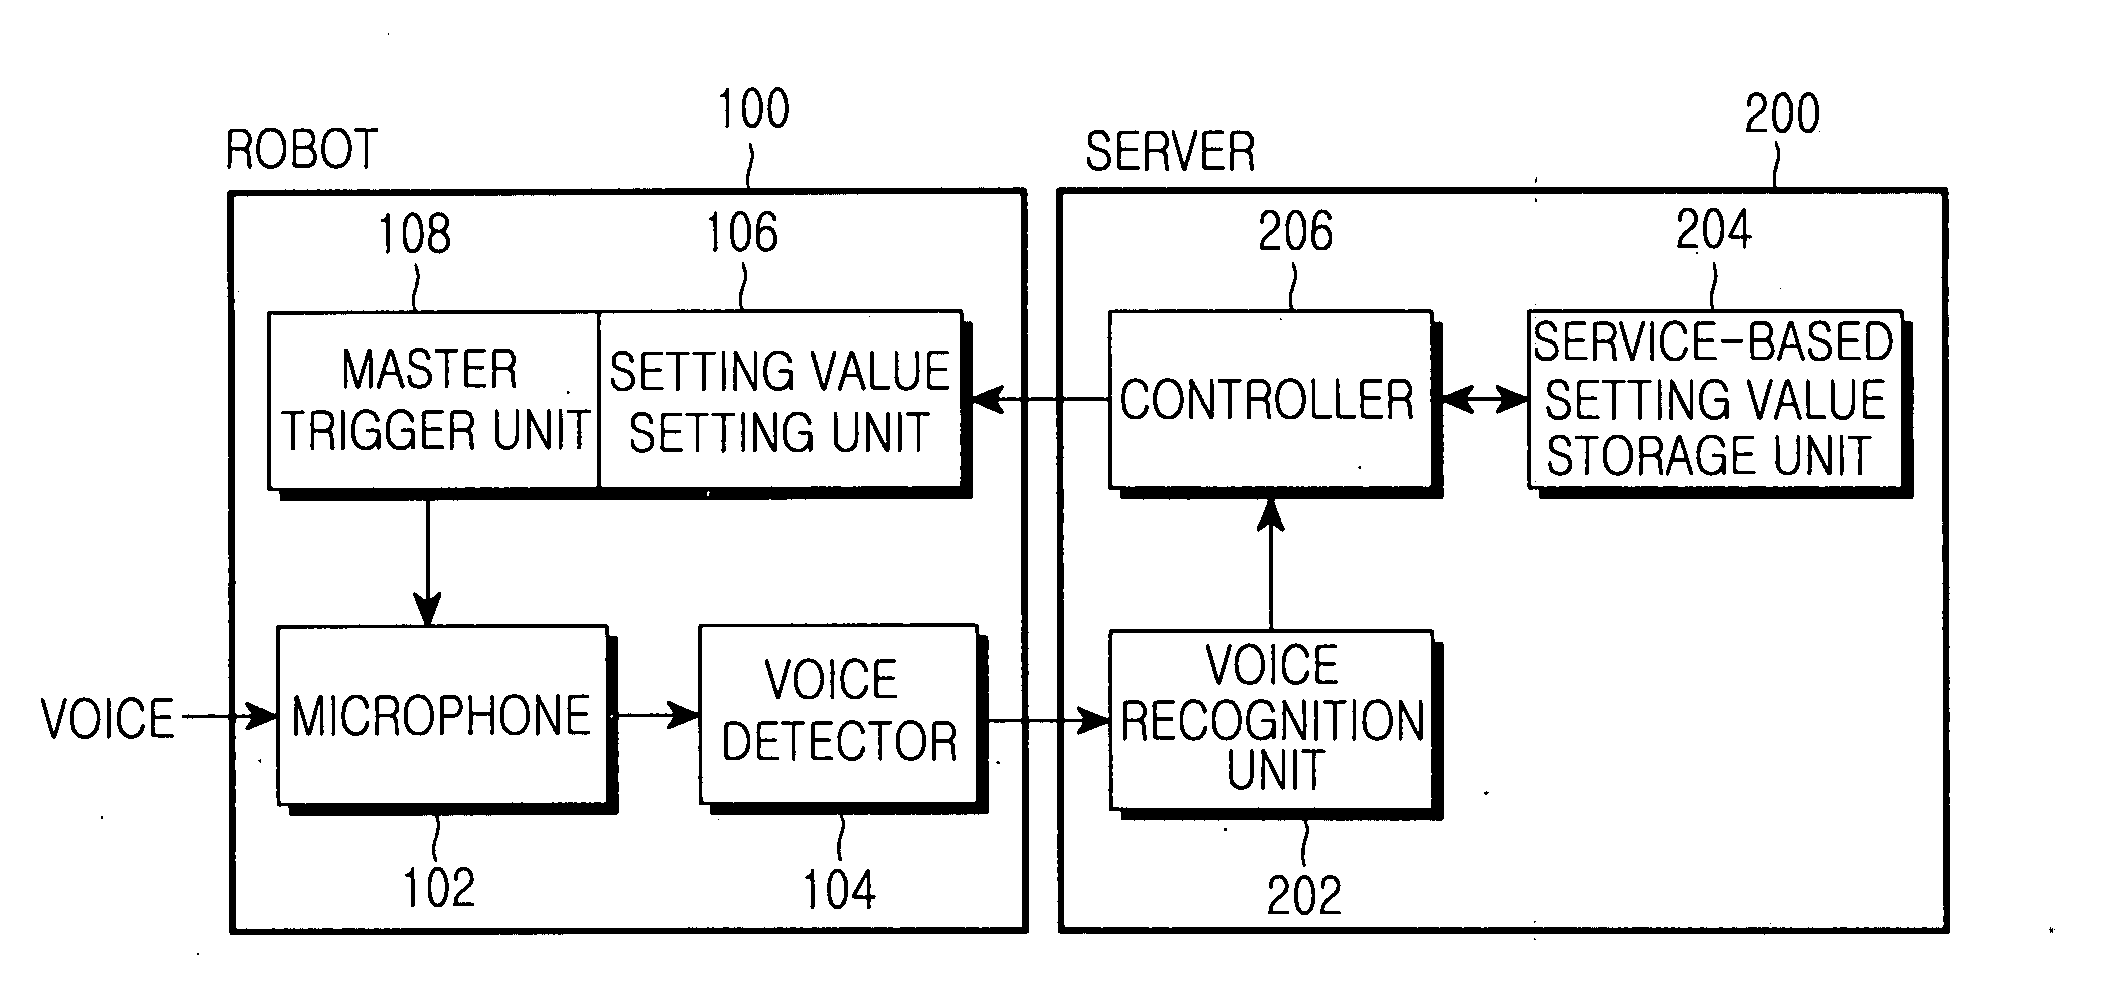 System and method for controlling voice detection of network terminal